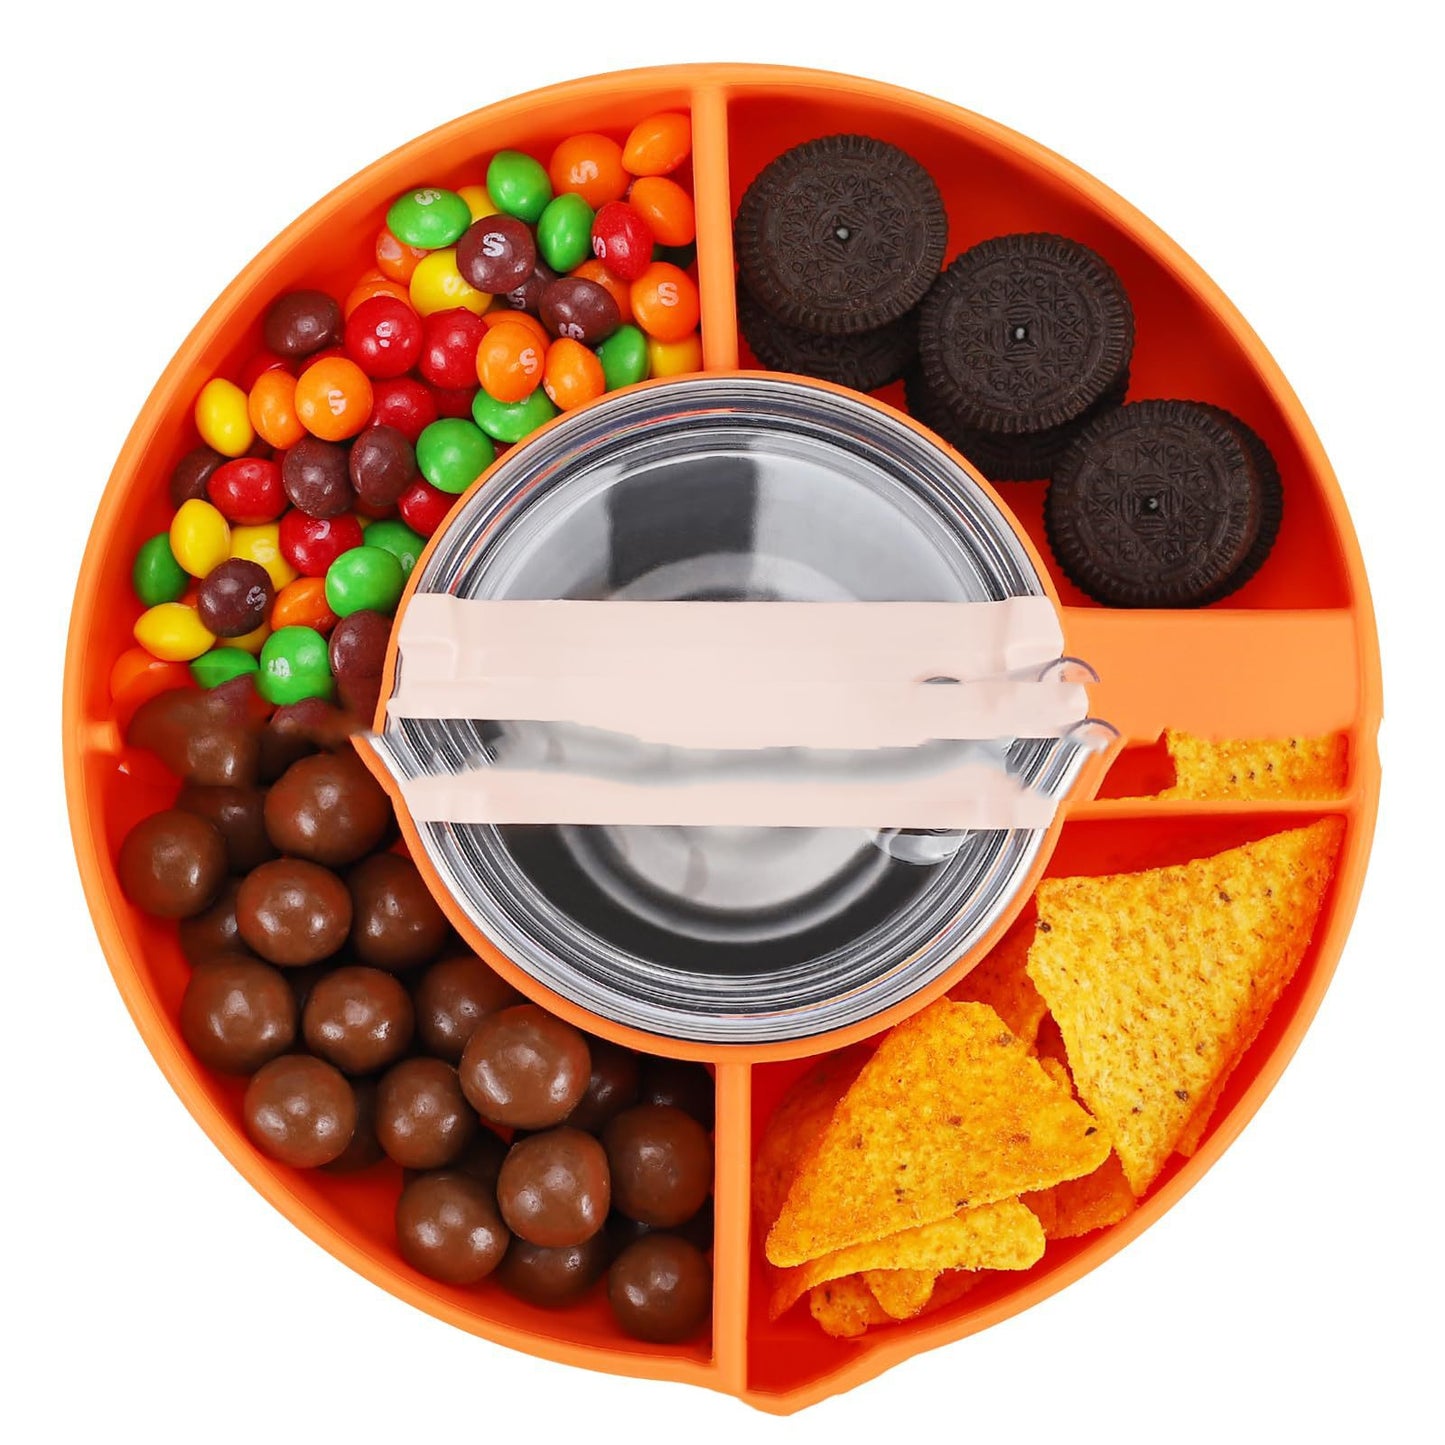 Silicone Snack For Cup 40 Oz Reusable Snack Container 4 Compartment Snack Platters Cup Snack Bowl Cup Holder Food Tray